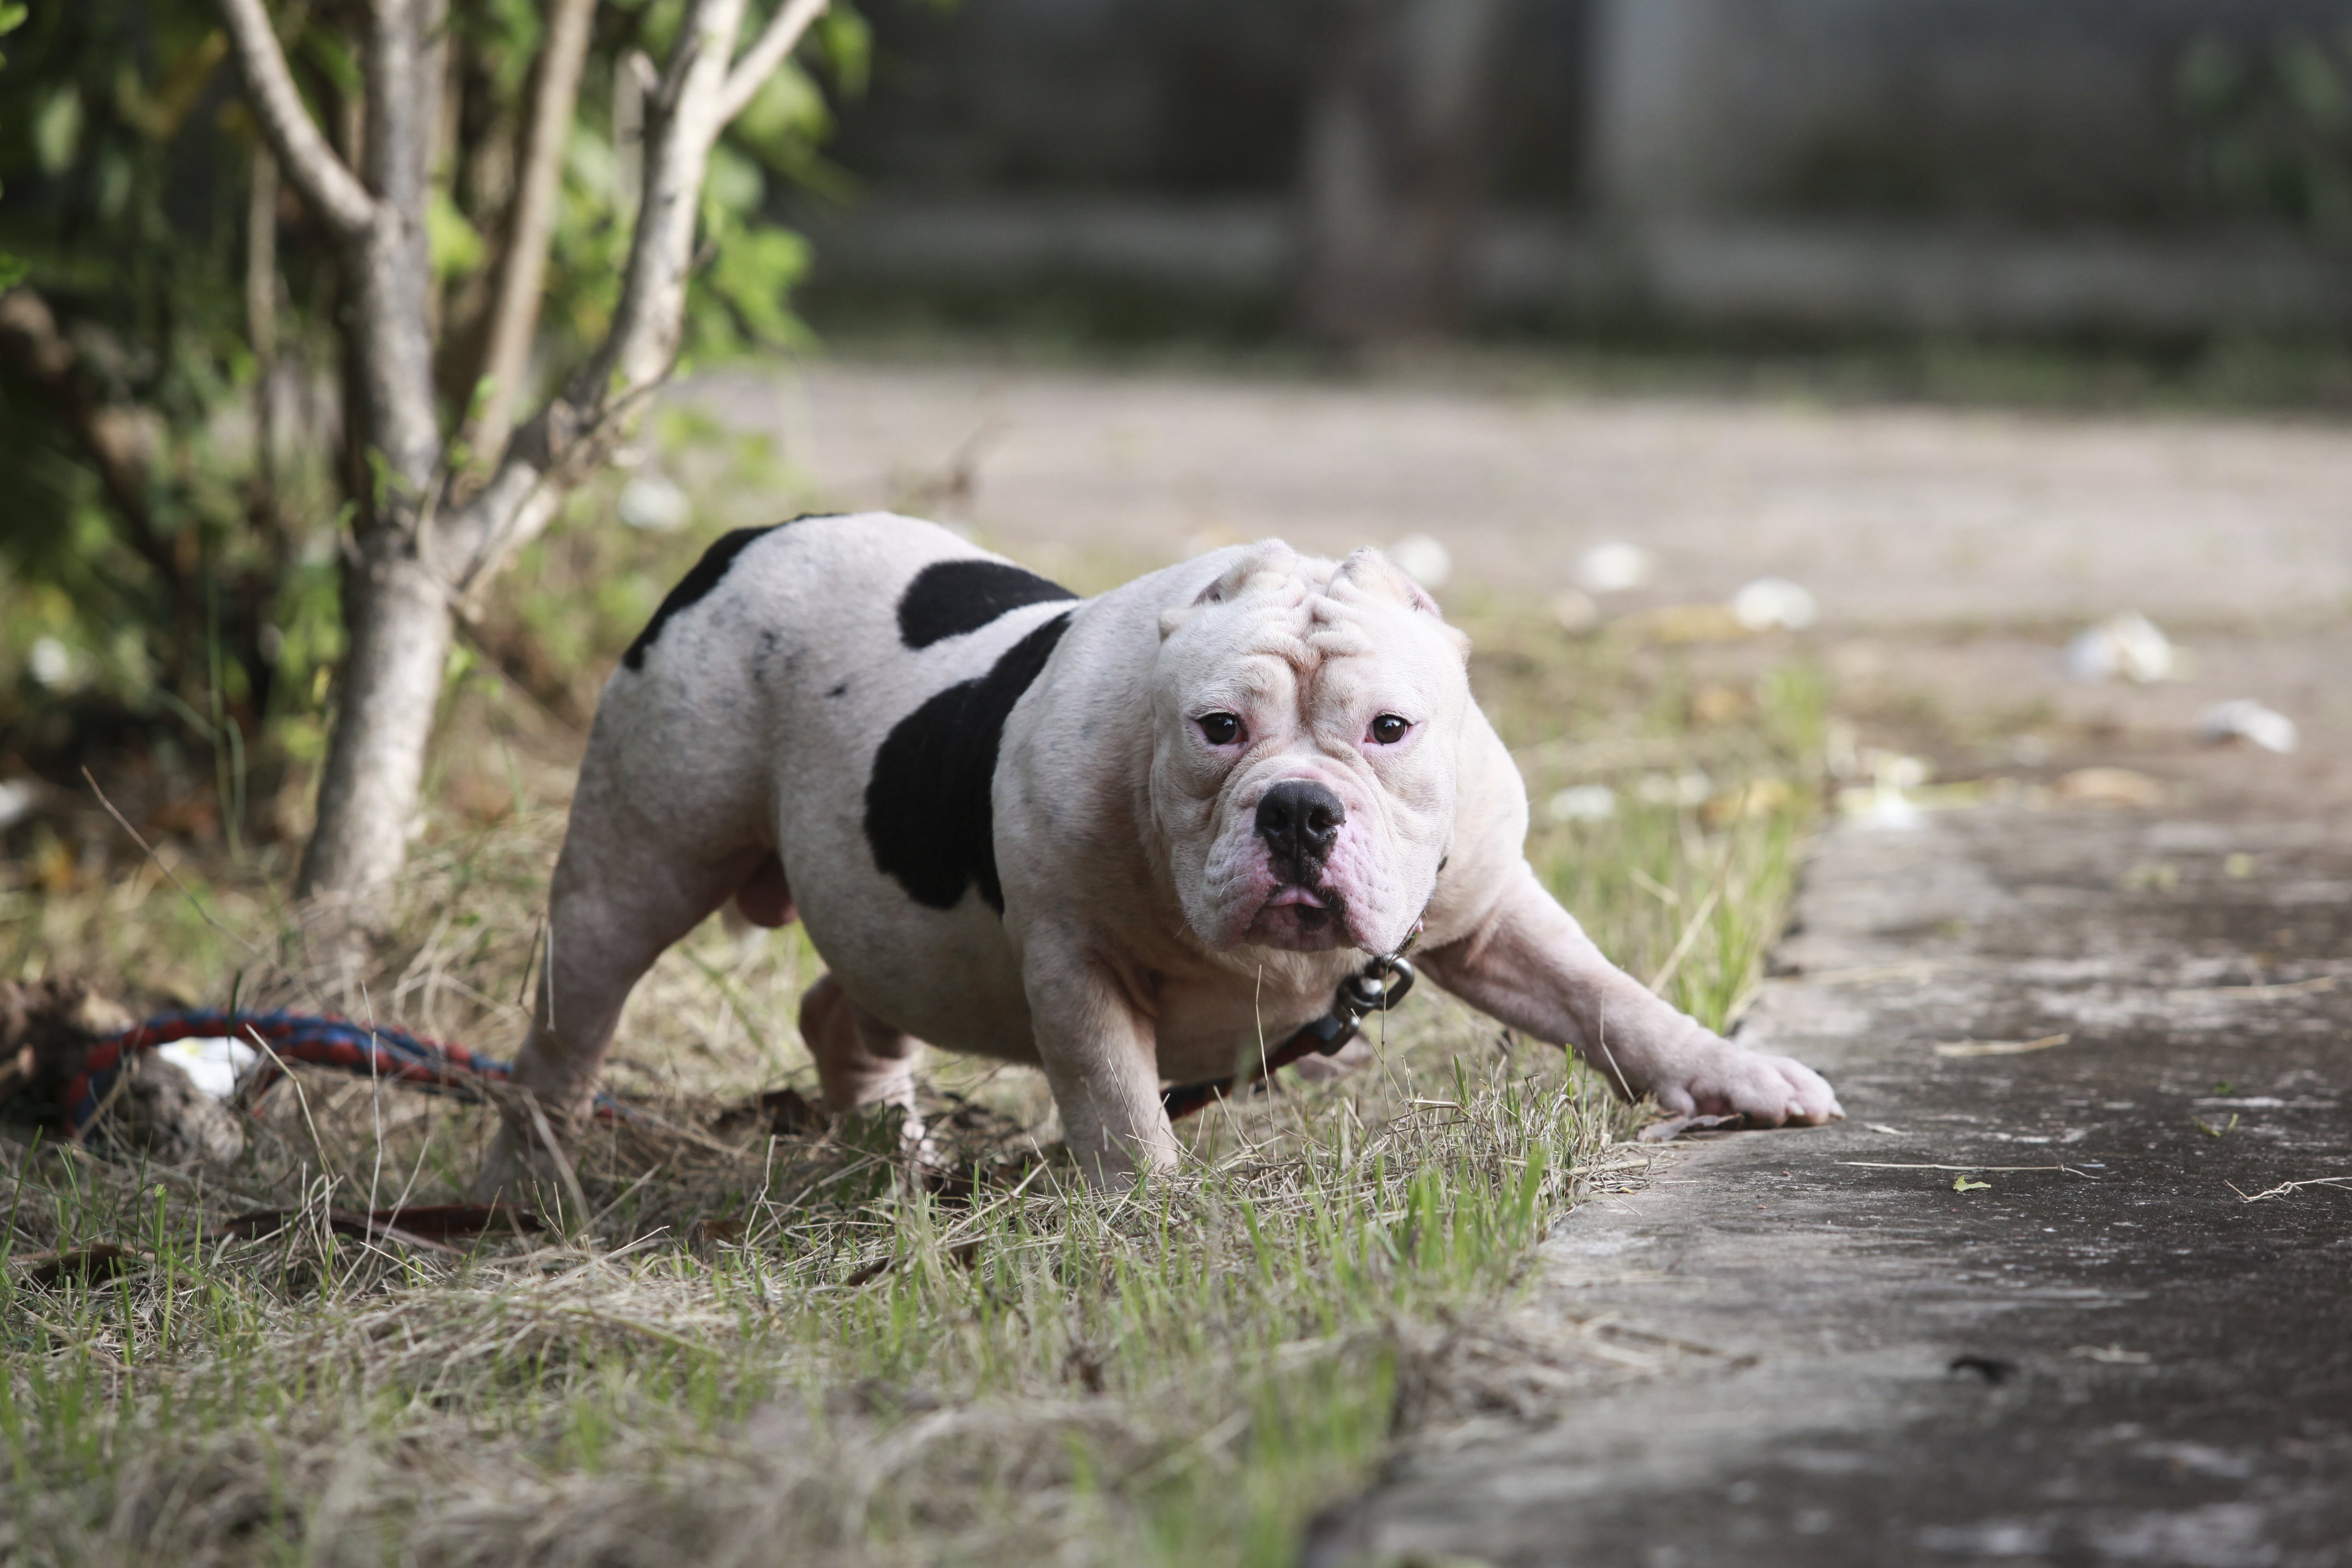 A pit bull braces itself for an attack | Photo: Shutterstock/Tungtron